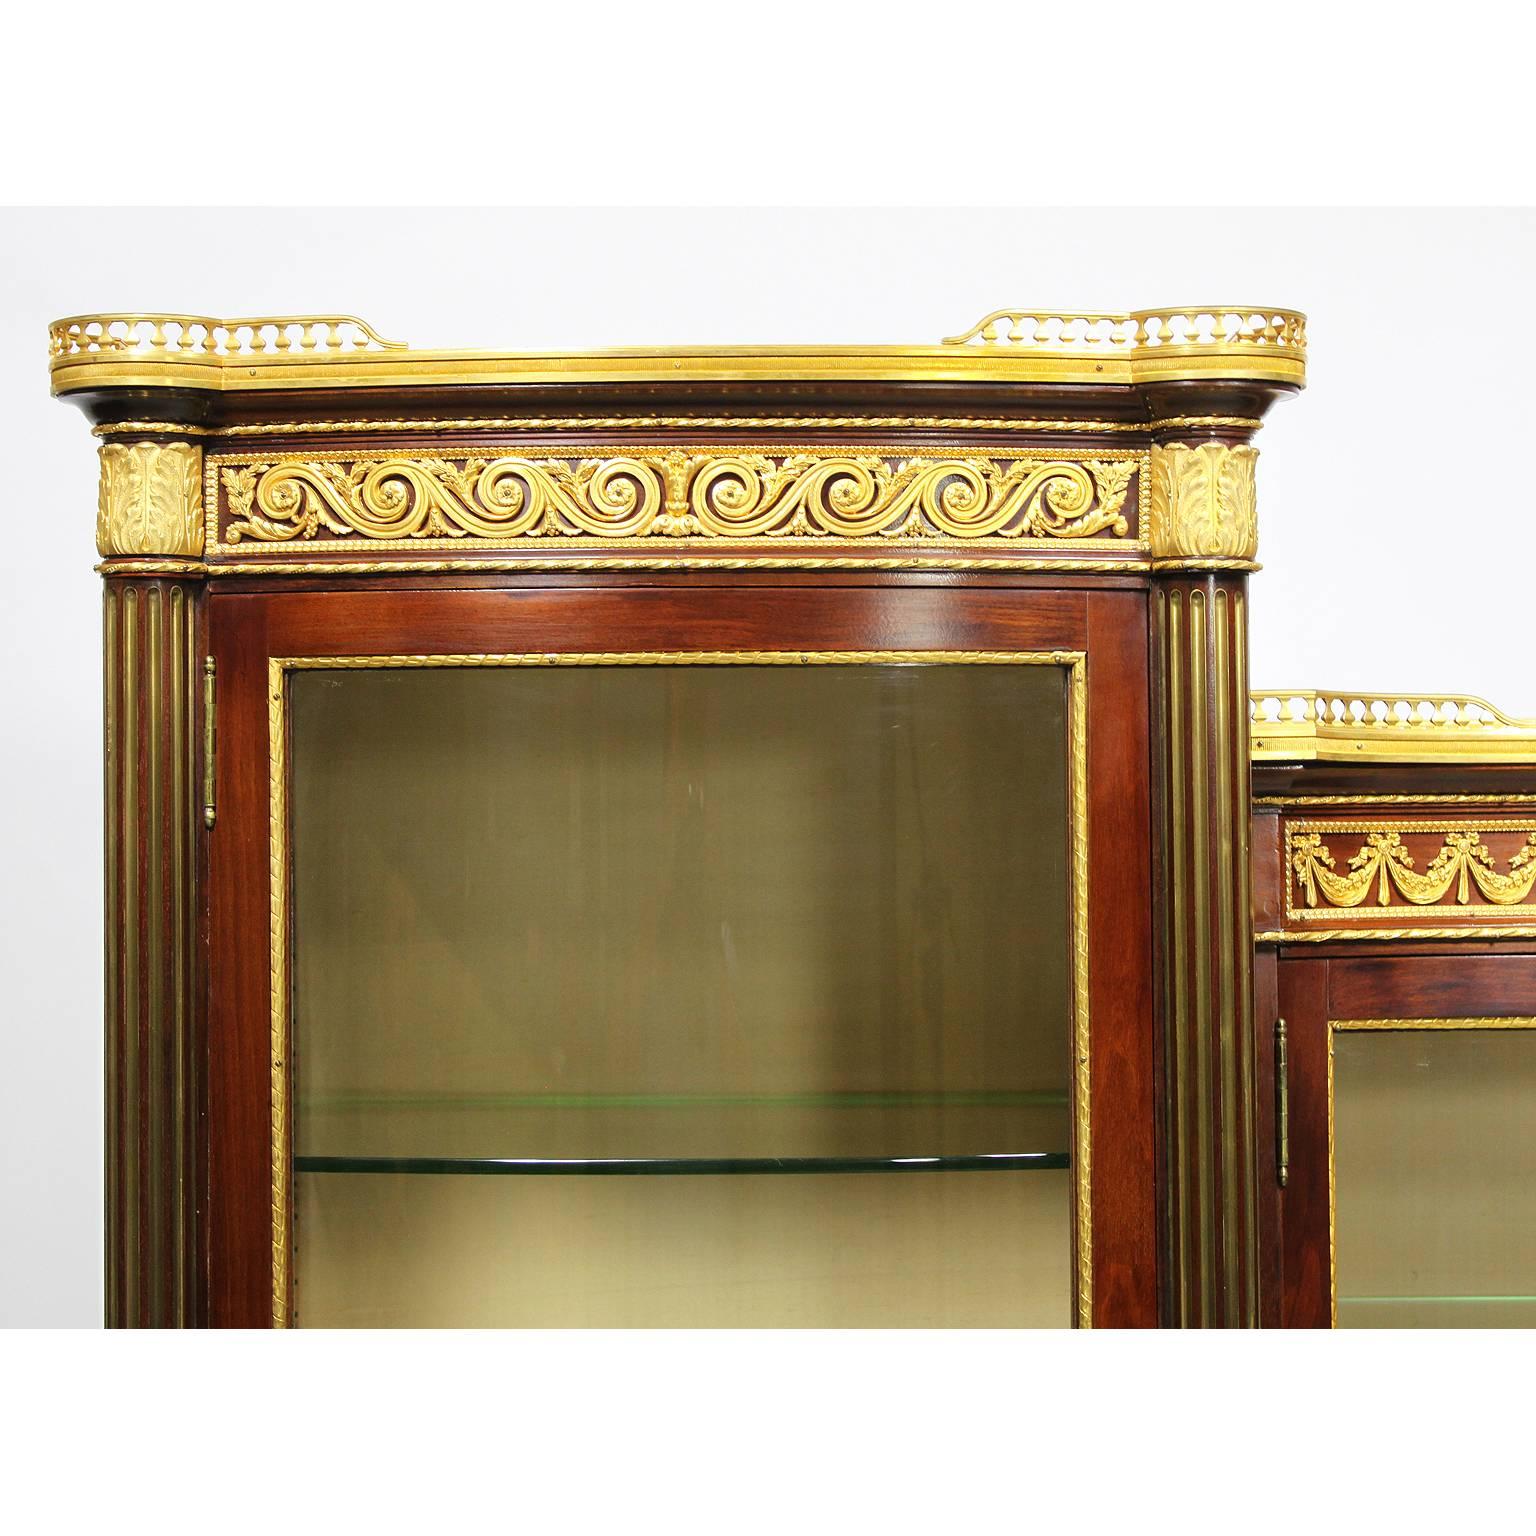 French 19th-20th Century Louis XVI Style Mahogany and Ormolu-Mounted Vitrine In Good Condition For Sale In Los Angeles, CA